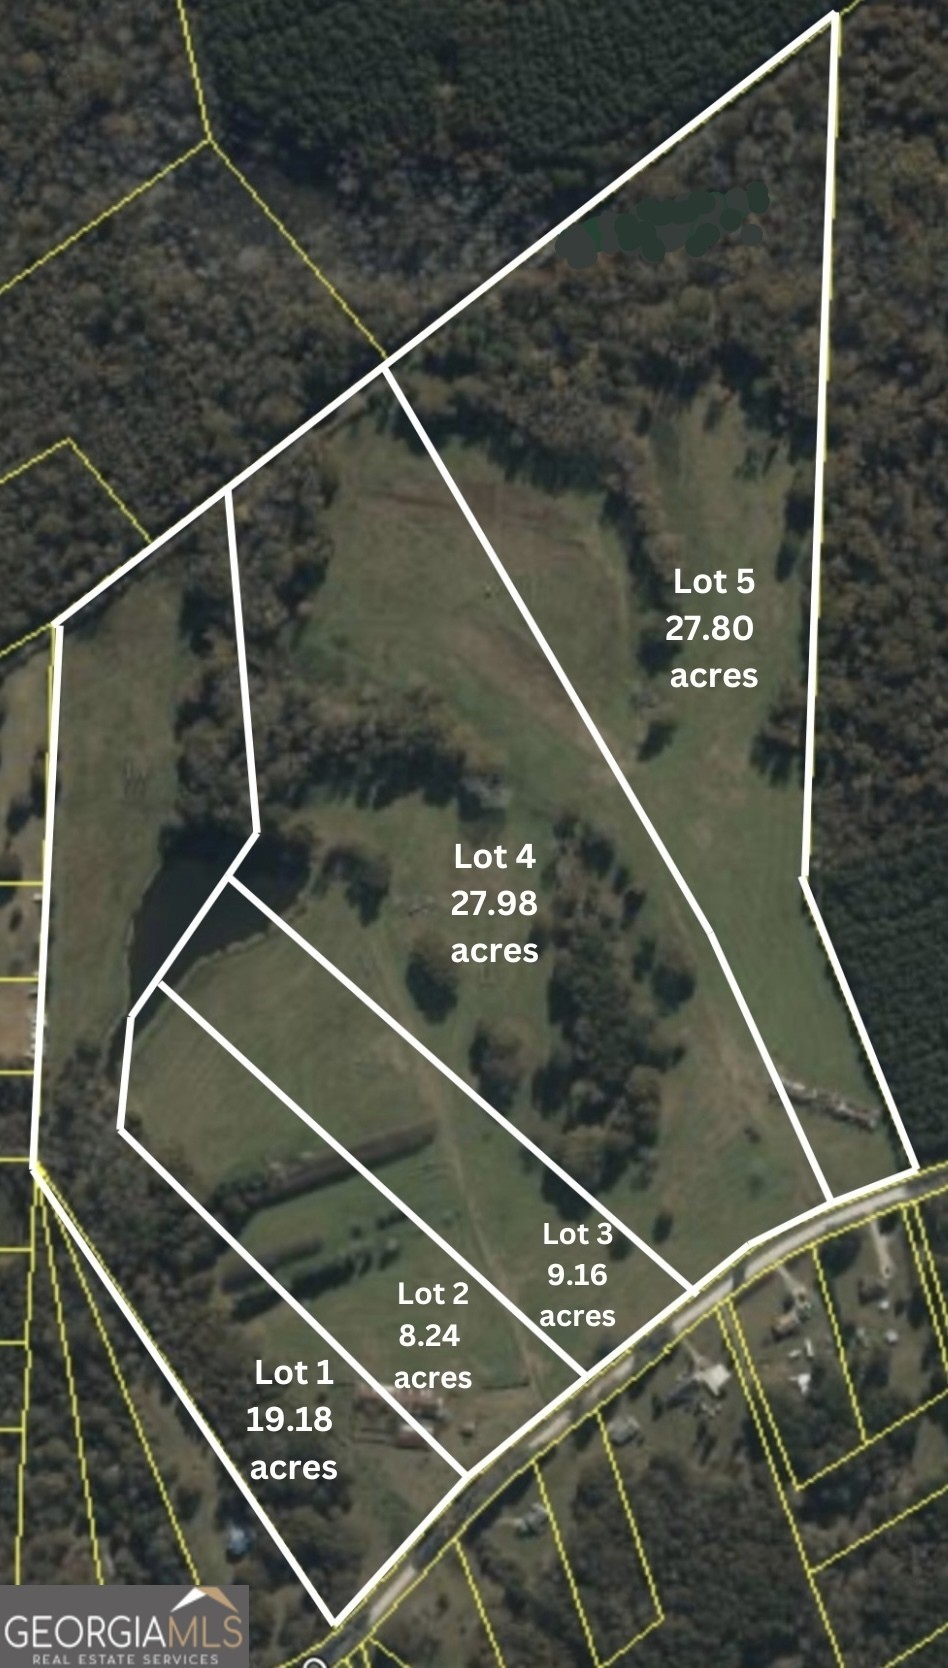 4. 0 Old Zebulon Road - Tract 1